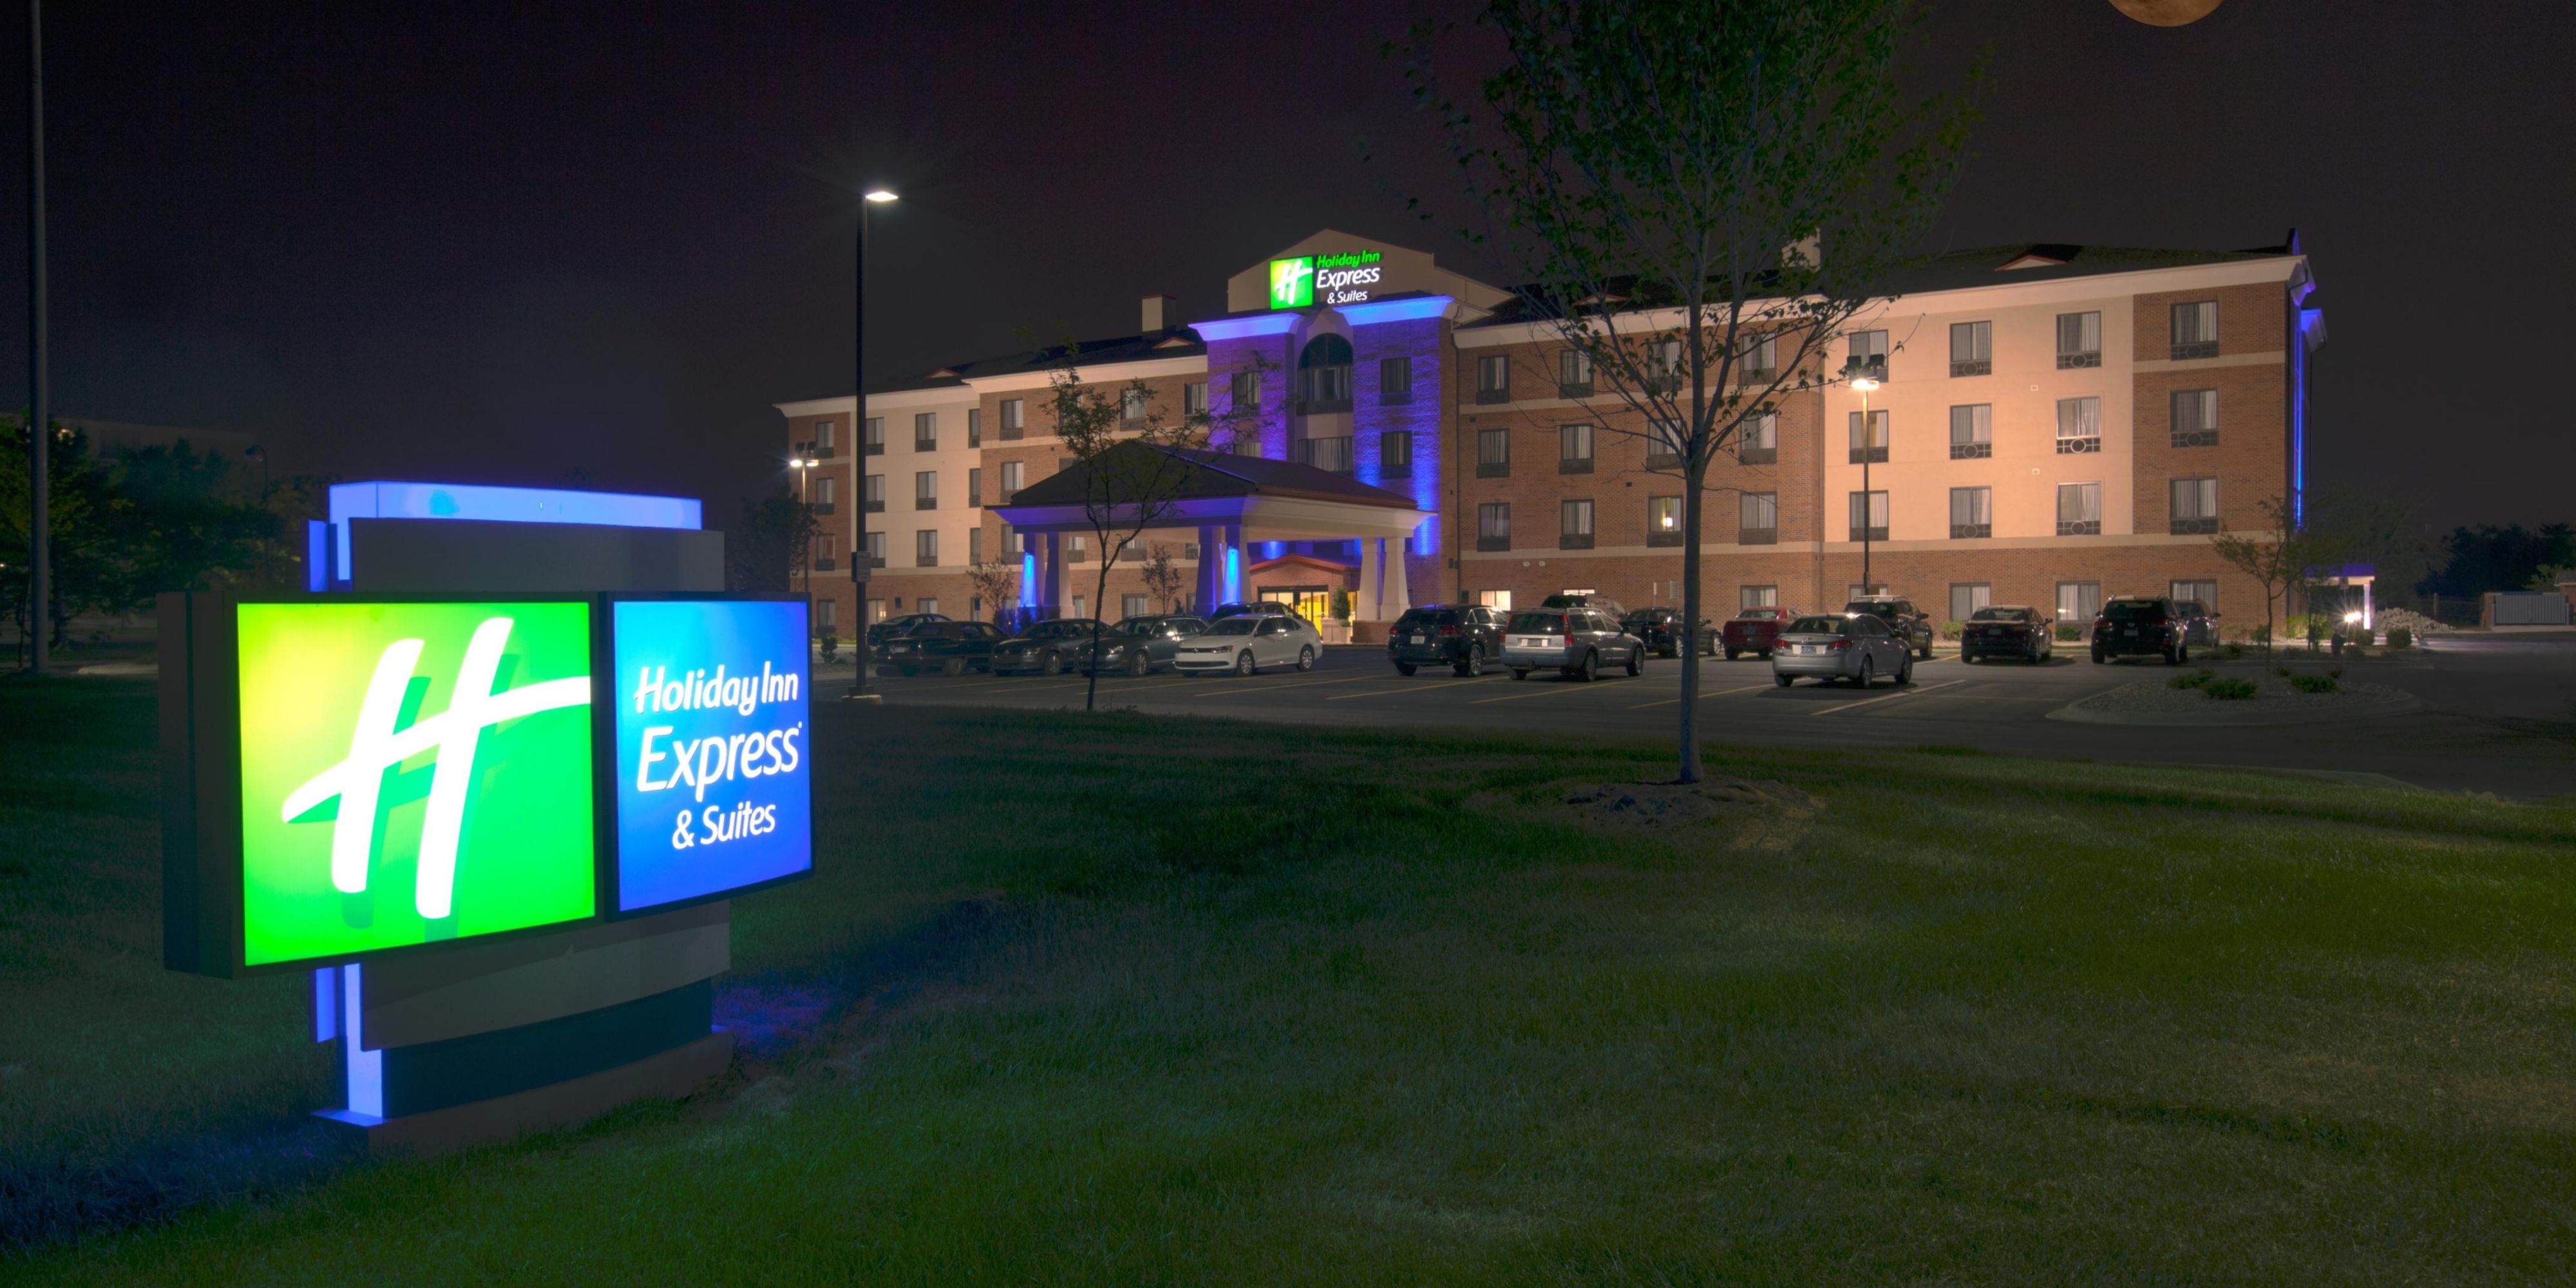 Troy Hotels near Detroit Zoo  Holiday Inn Express & Suites